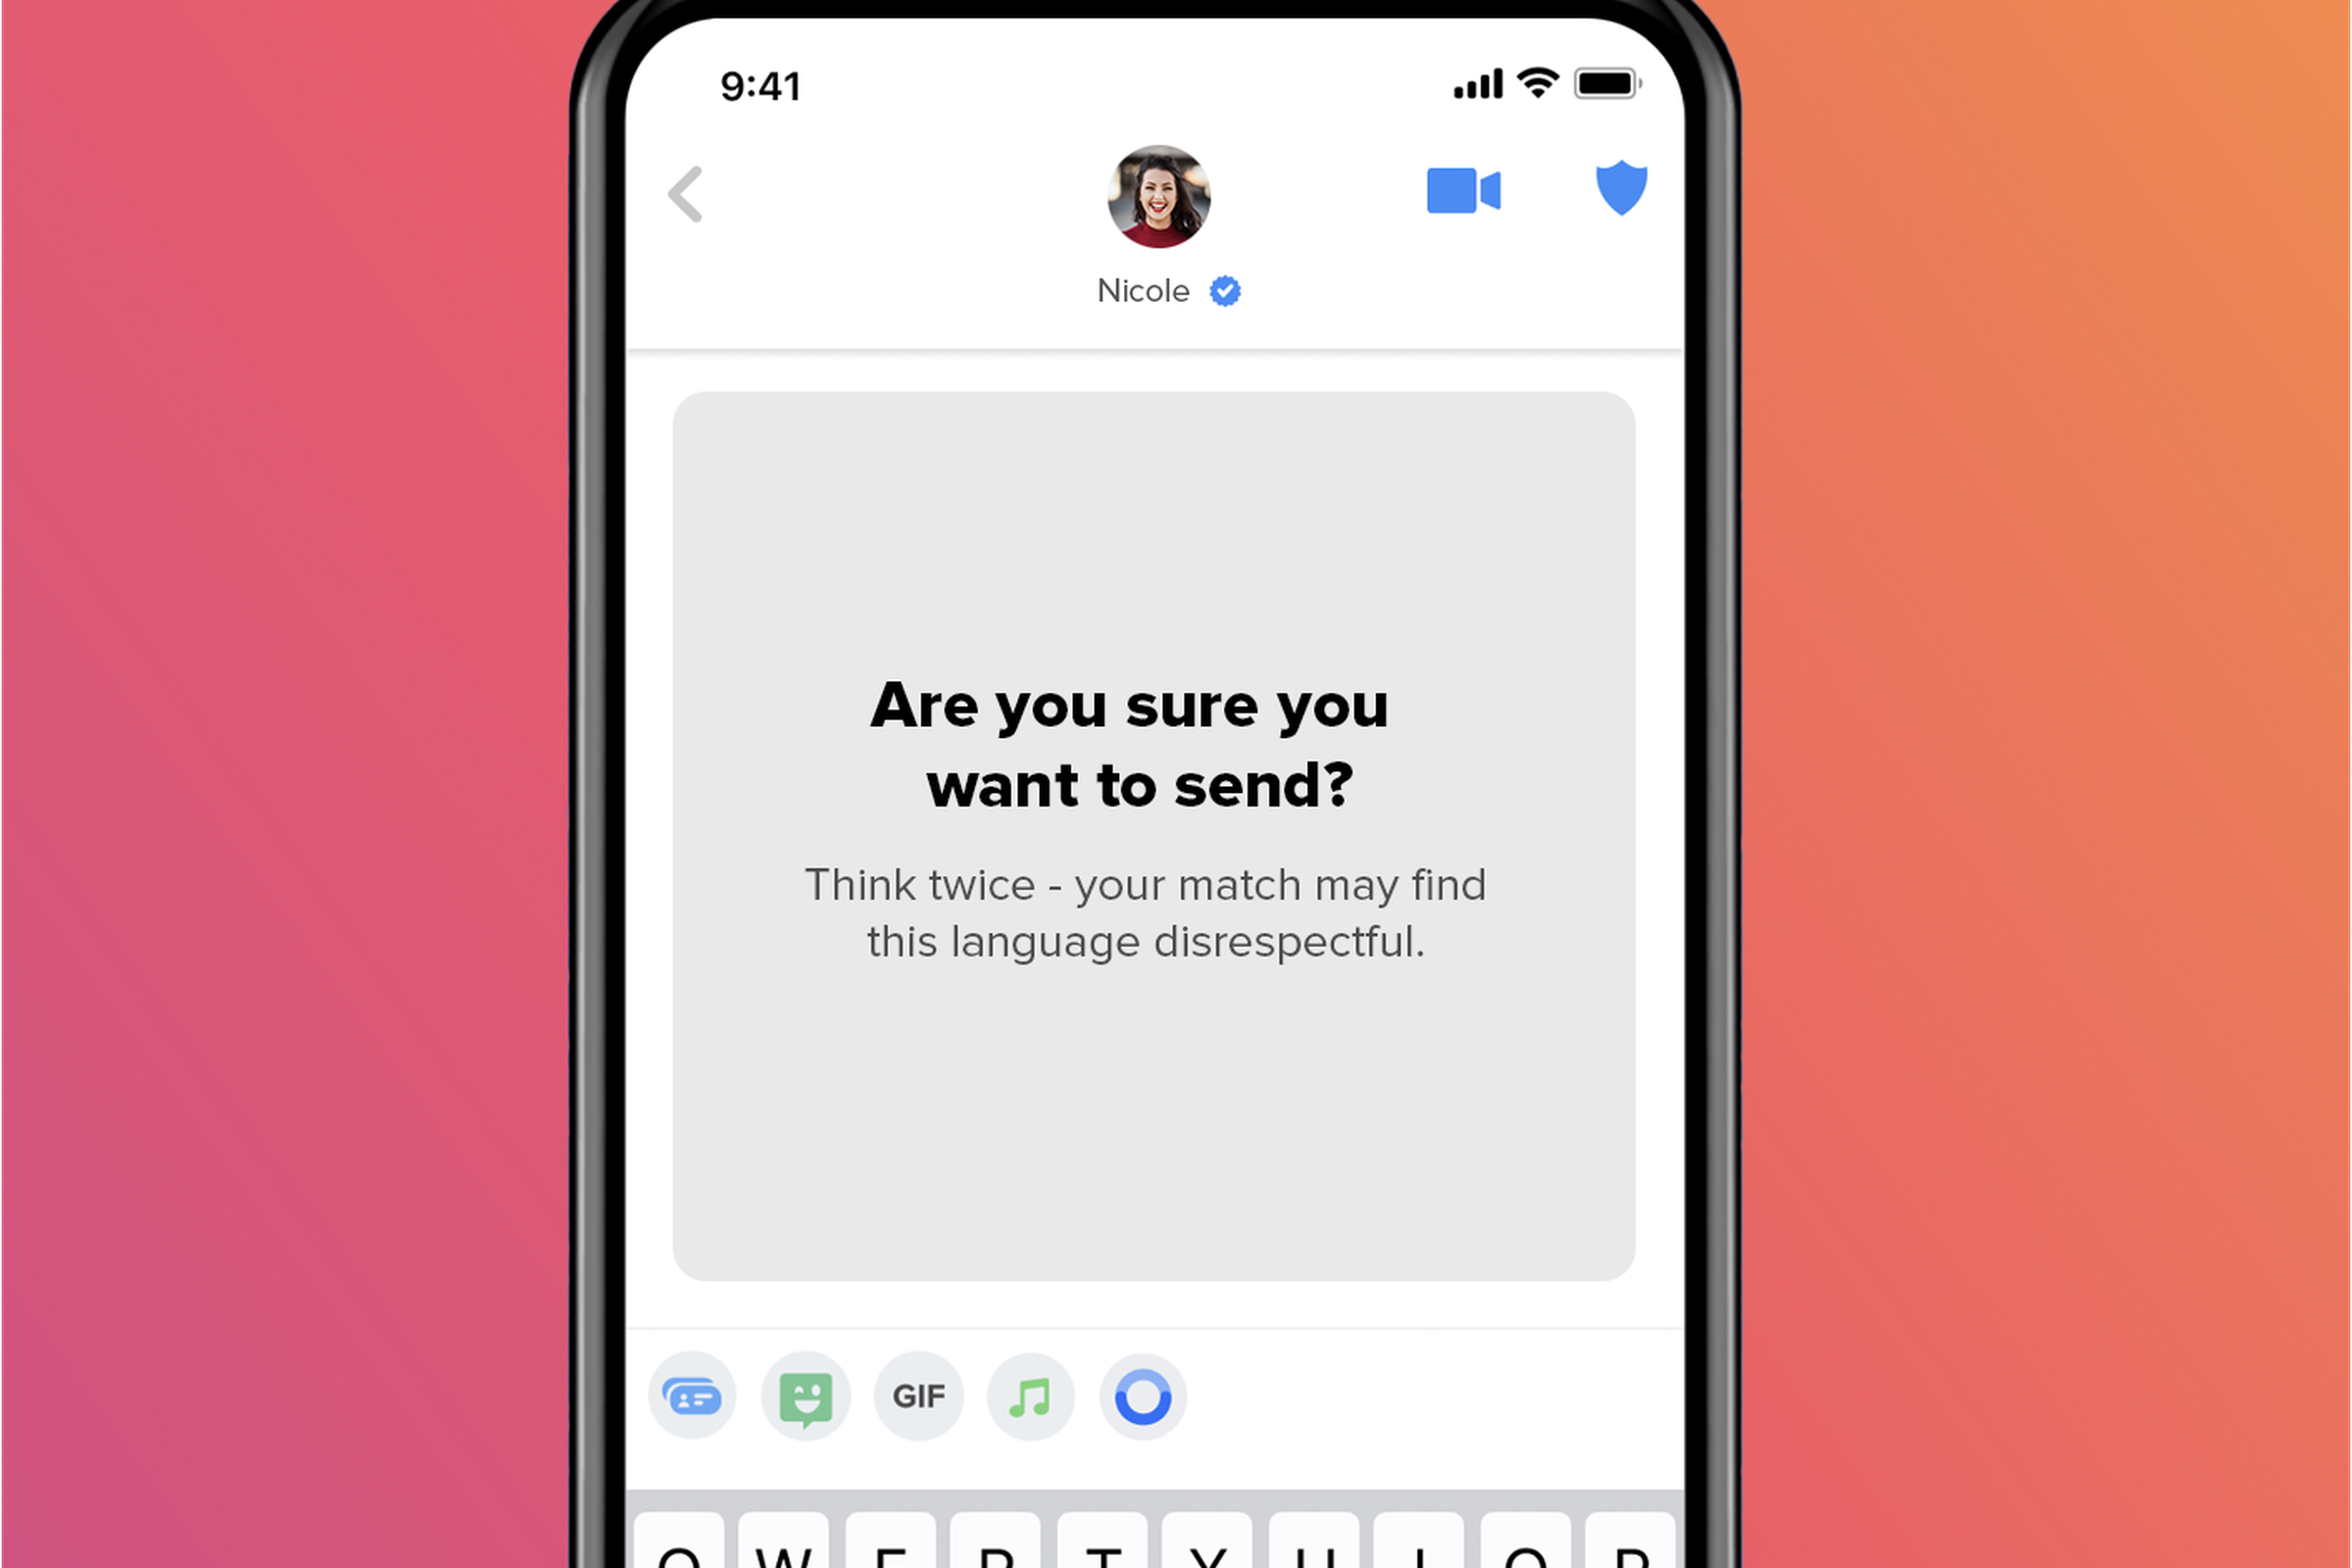 Tinder is launching Are You Sure?, a feature that asks users if they’re positive they want to send a possibly offensive message.